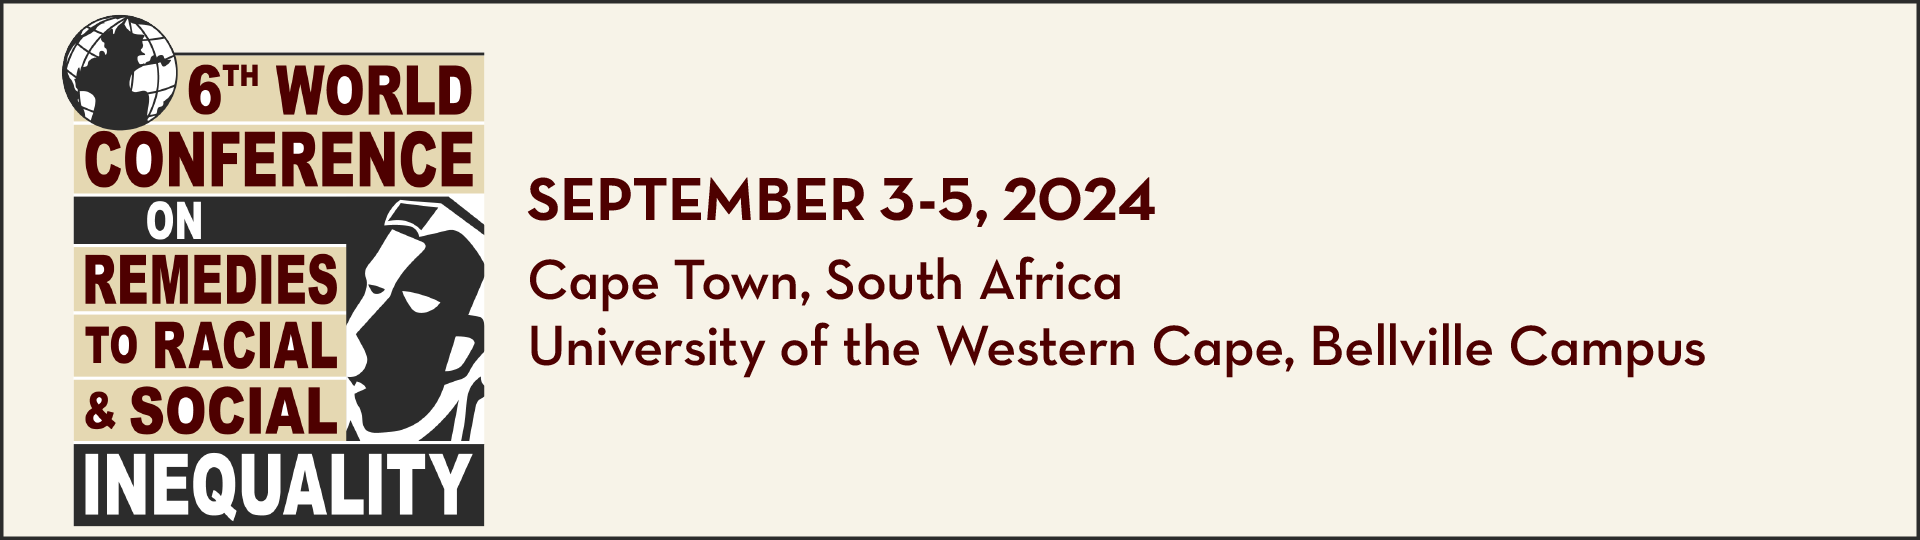 6th world conference on remedies to racial and social inequity. Cape Town, South Africa, on September 3-5, 2024 